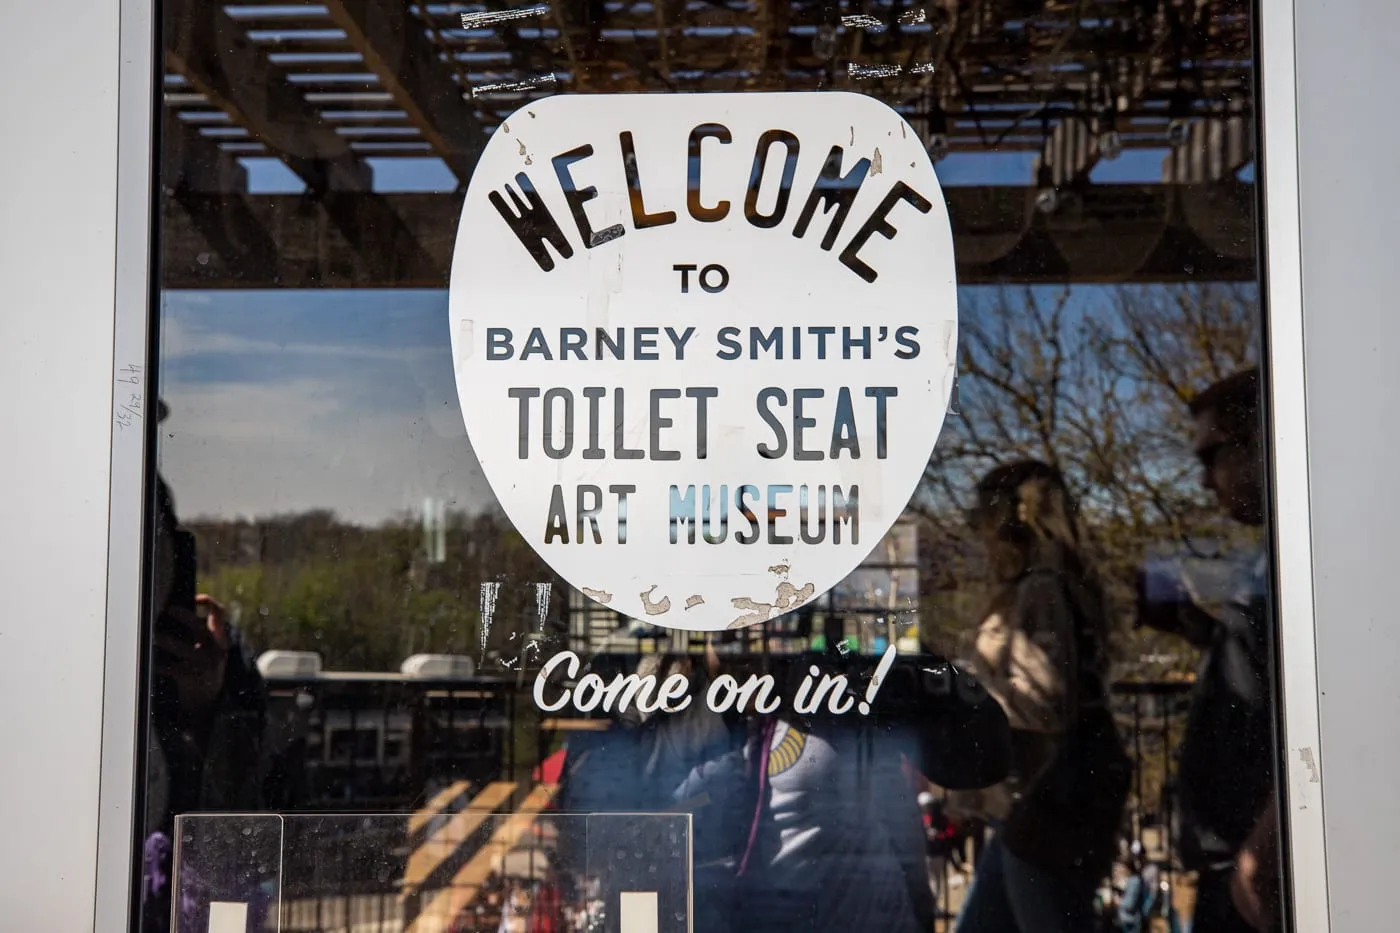 Welcome sign on door - Barney Smith's Toilet Seat Art Museum in The Colony, Texas at The Truck Yard Bar